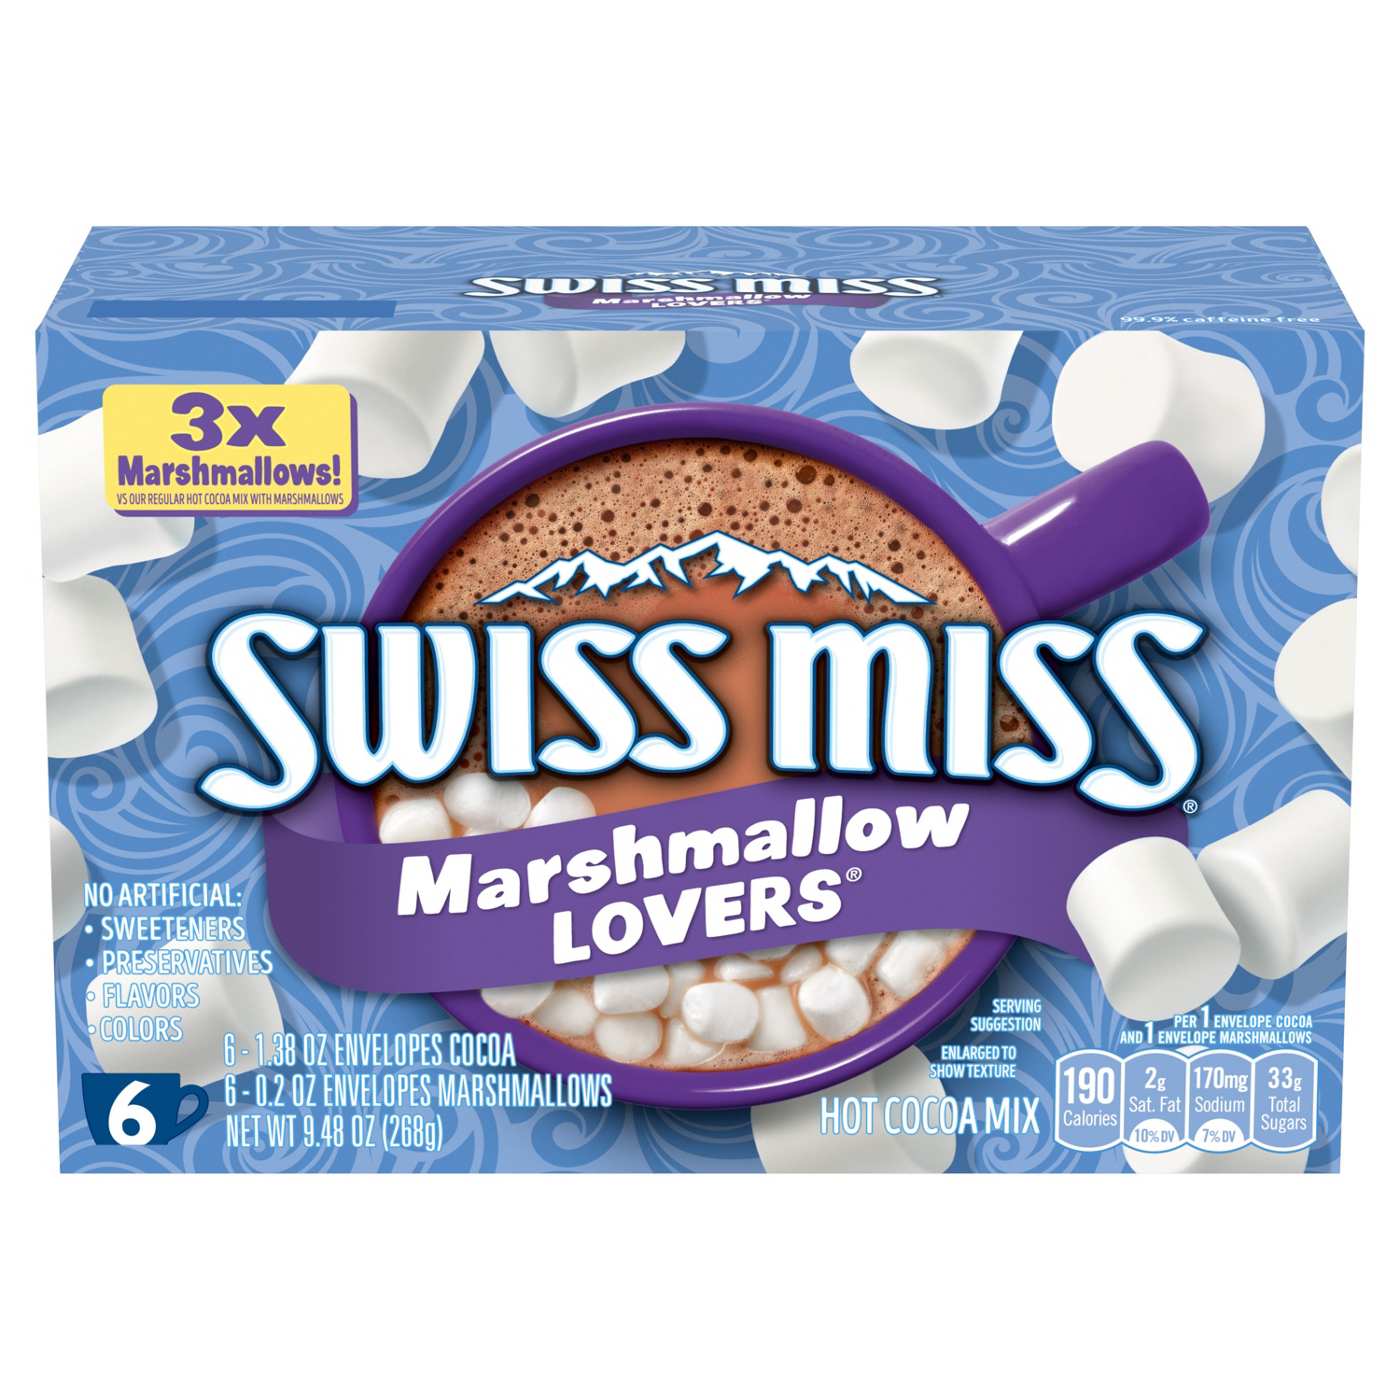 Swiss Miss Marshmallow Lovers Hot Cocoa Mix; image 1 of 7